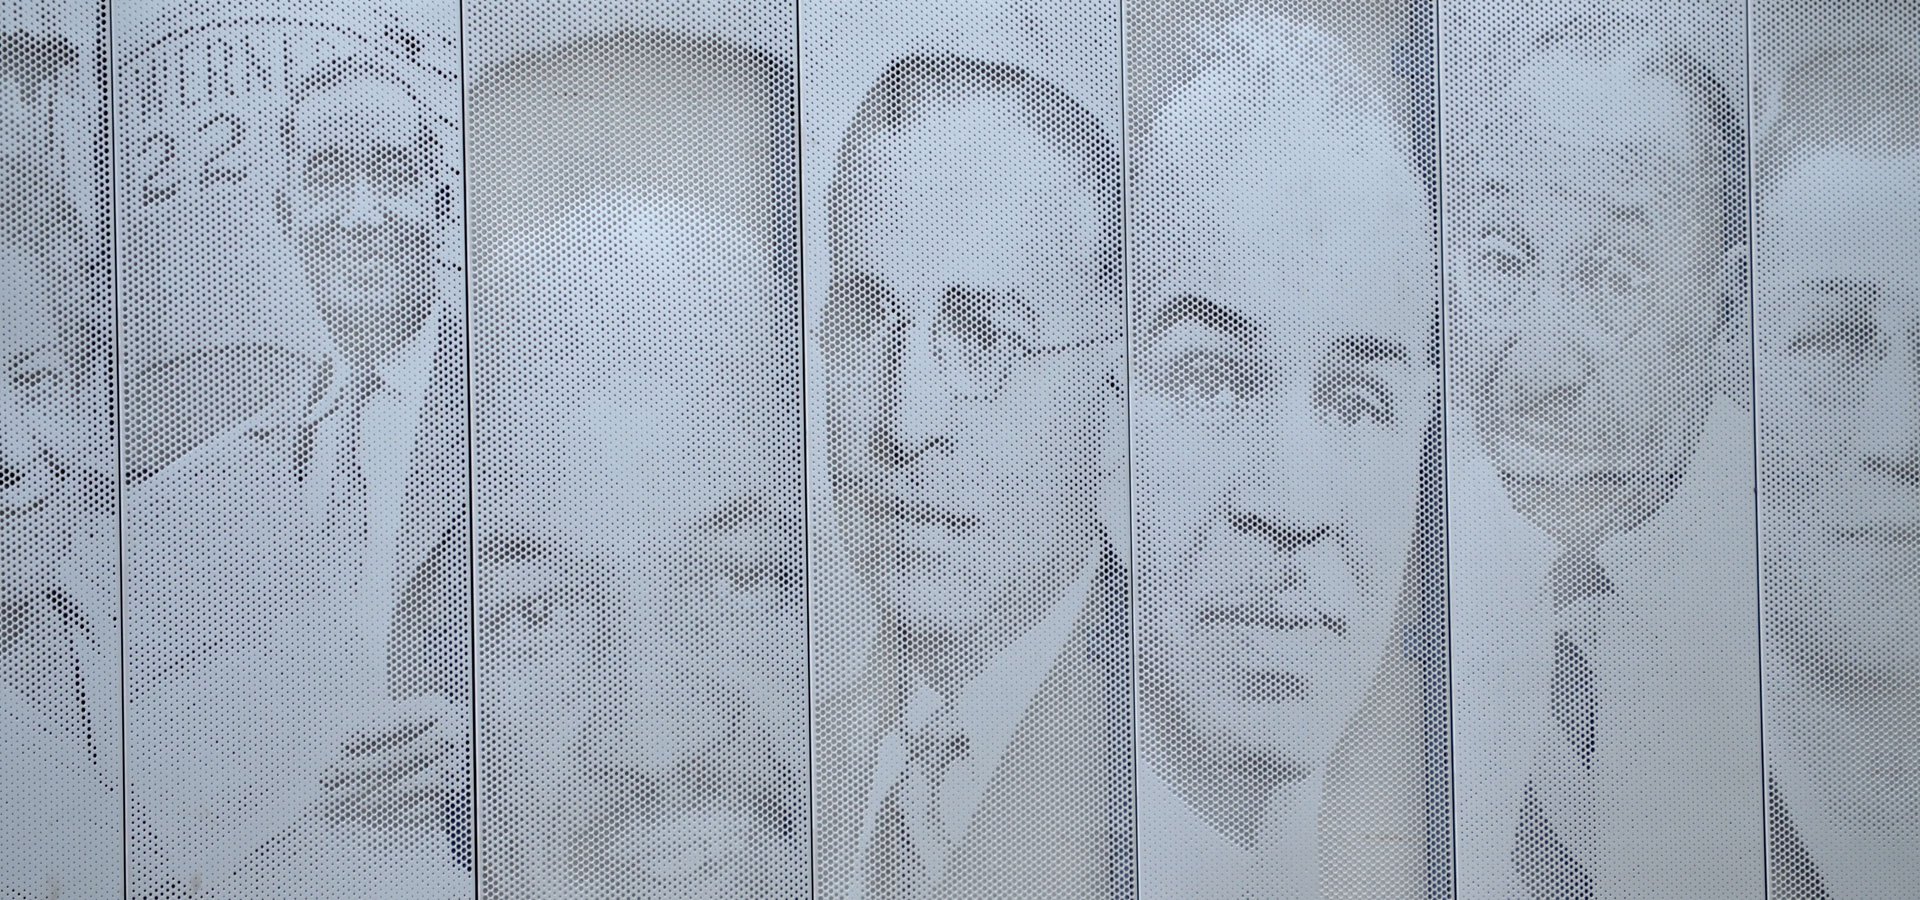 A building wall with decorative portraits etched in metal